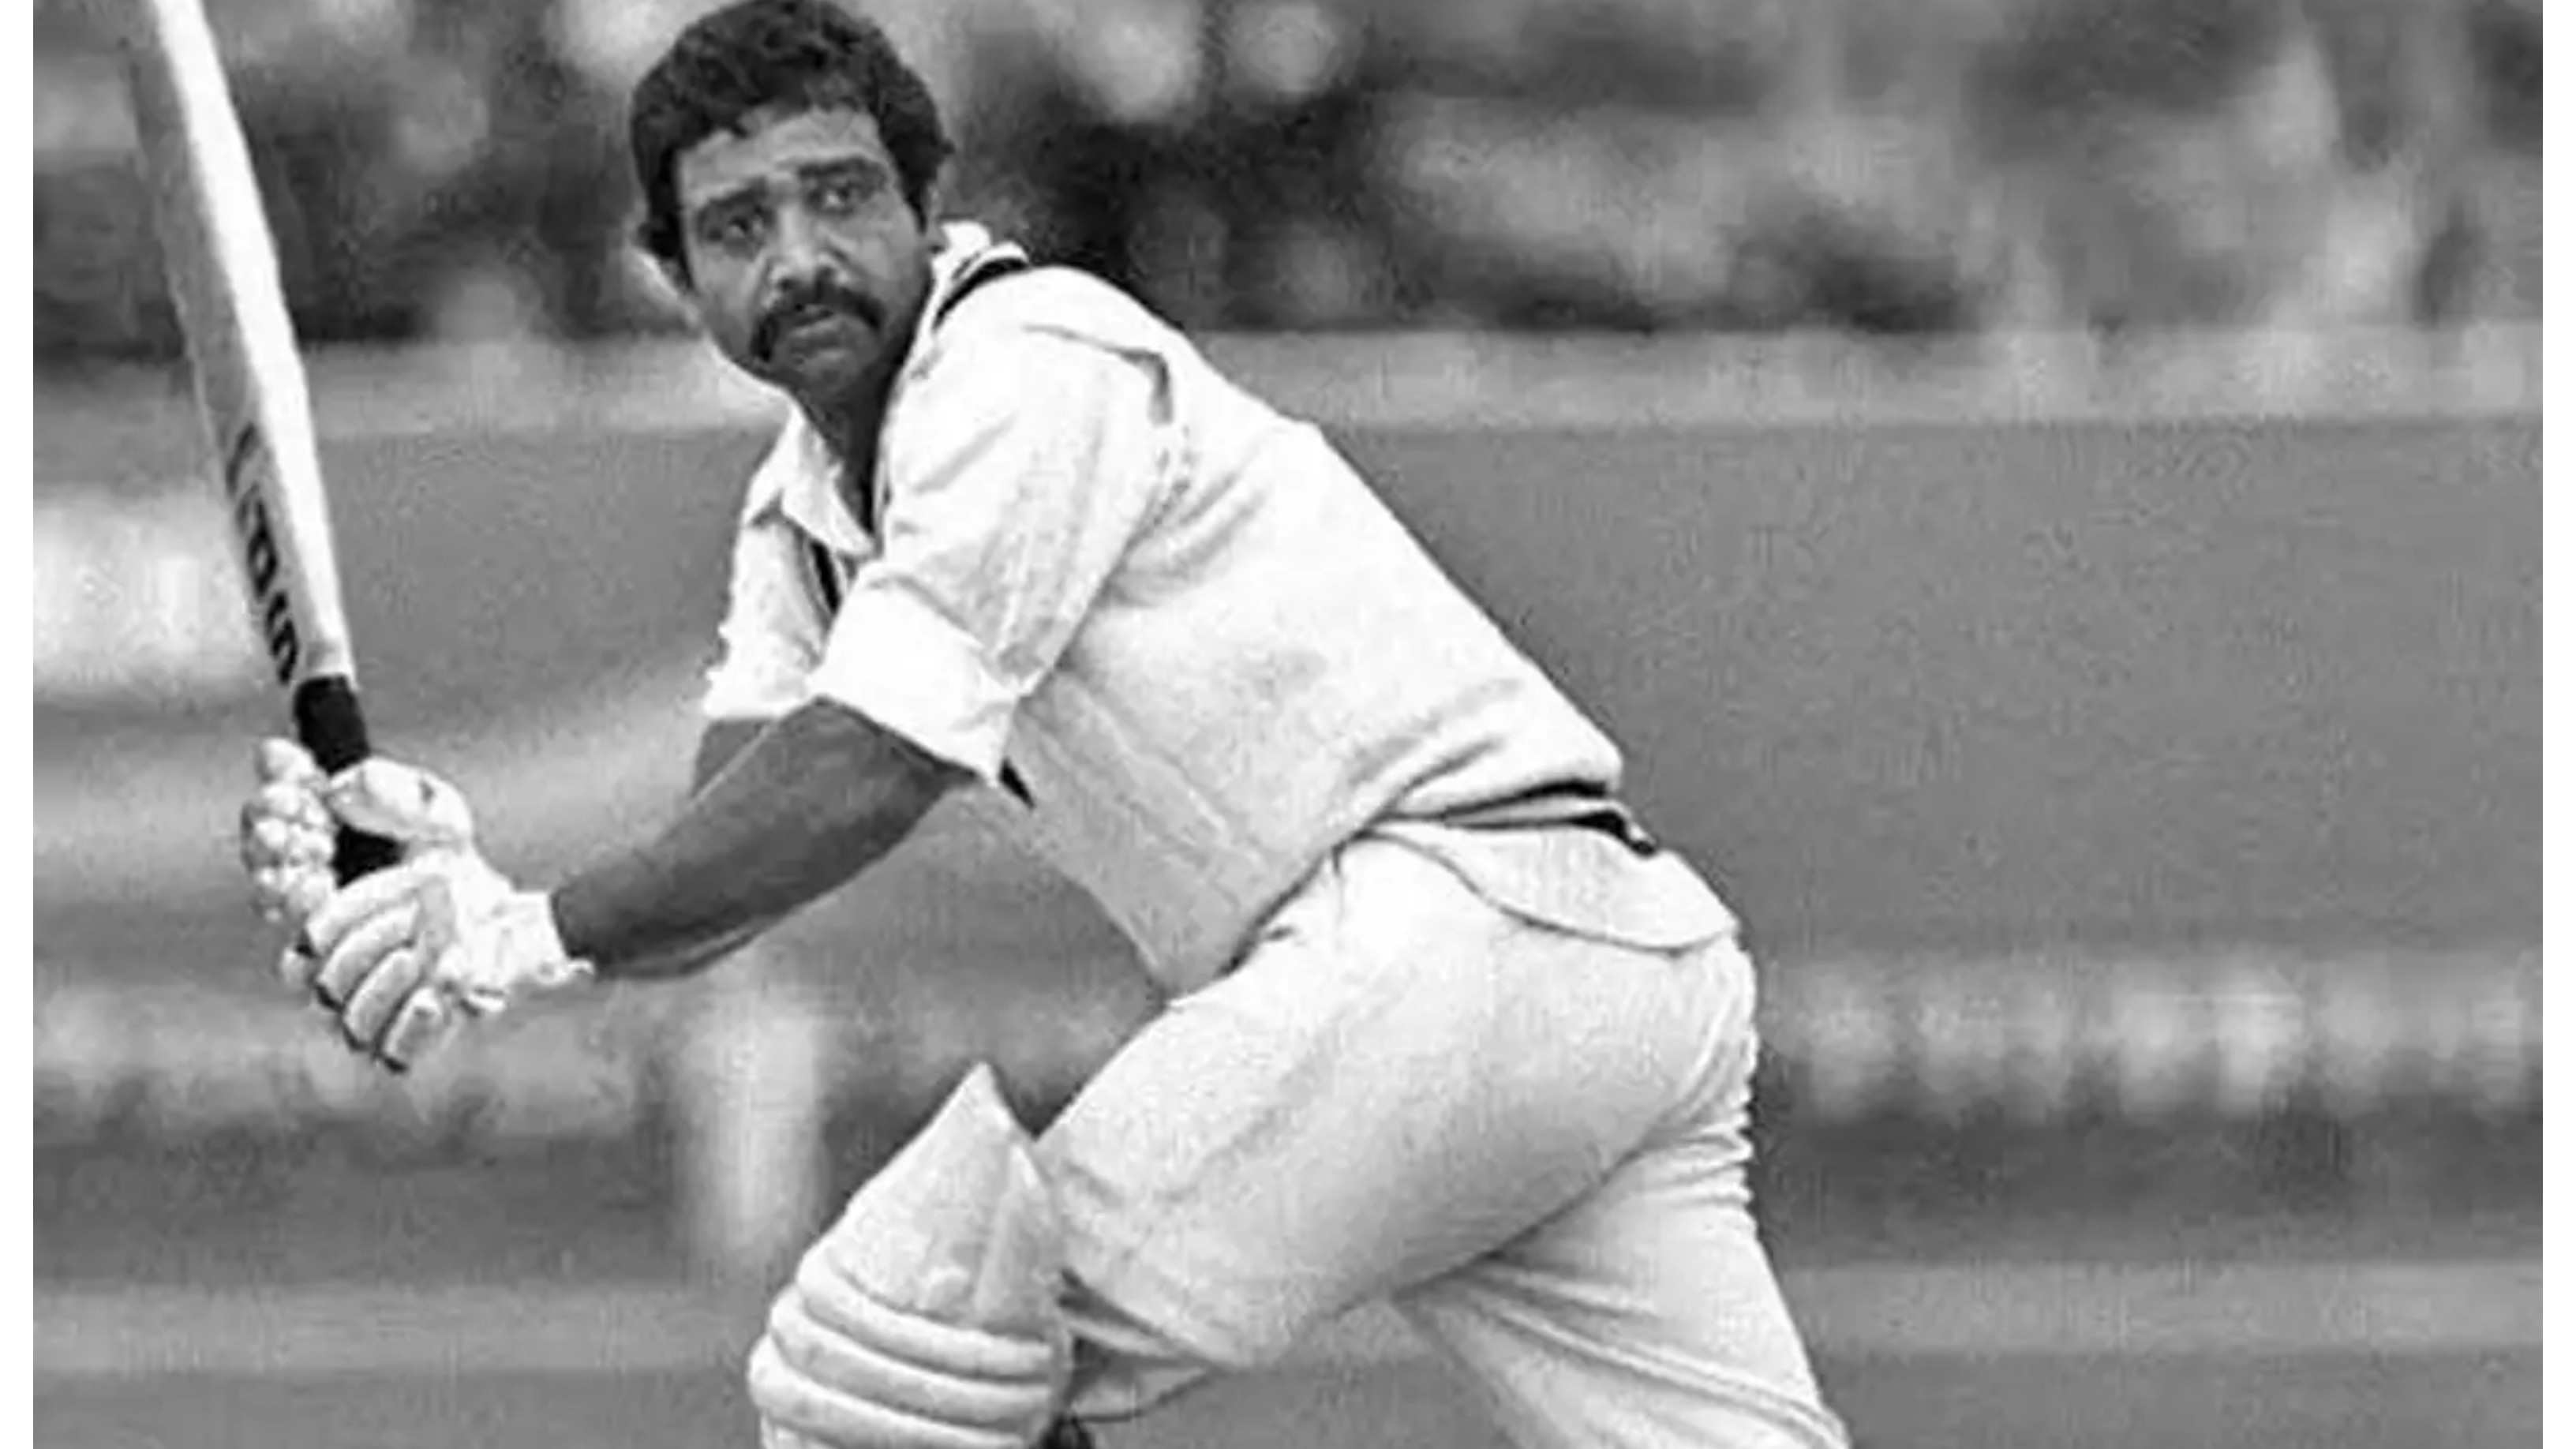 “I was very, very hurt”: Viswanath recalls being dropped from Team India after poor outing in Pakistan